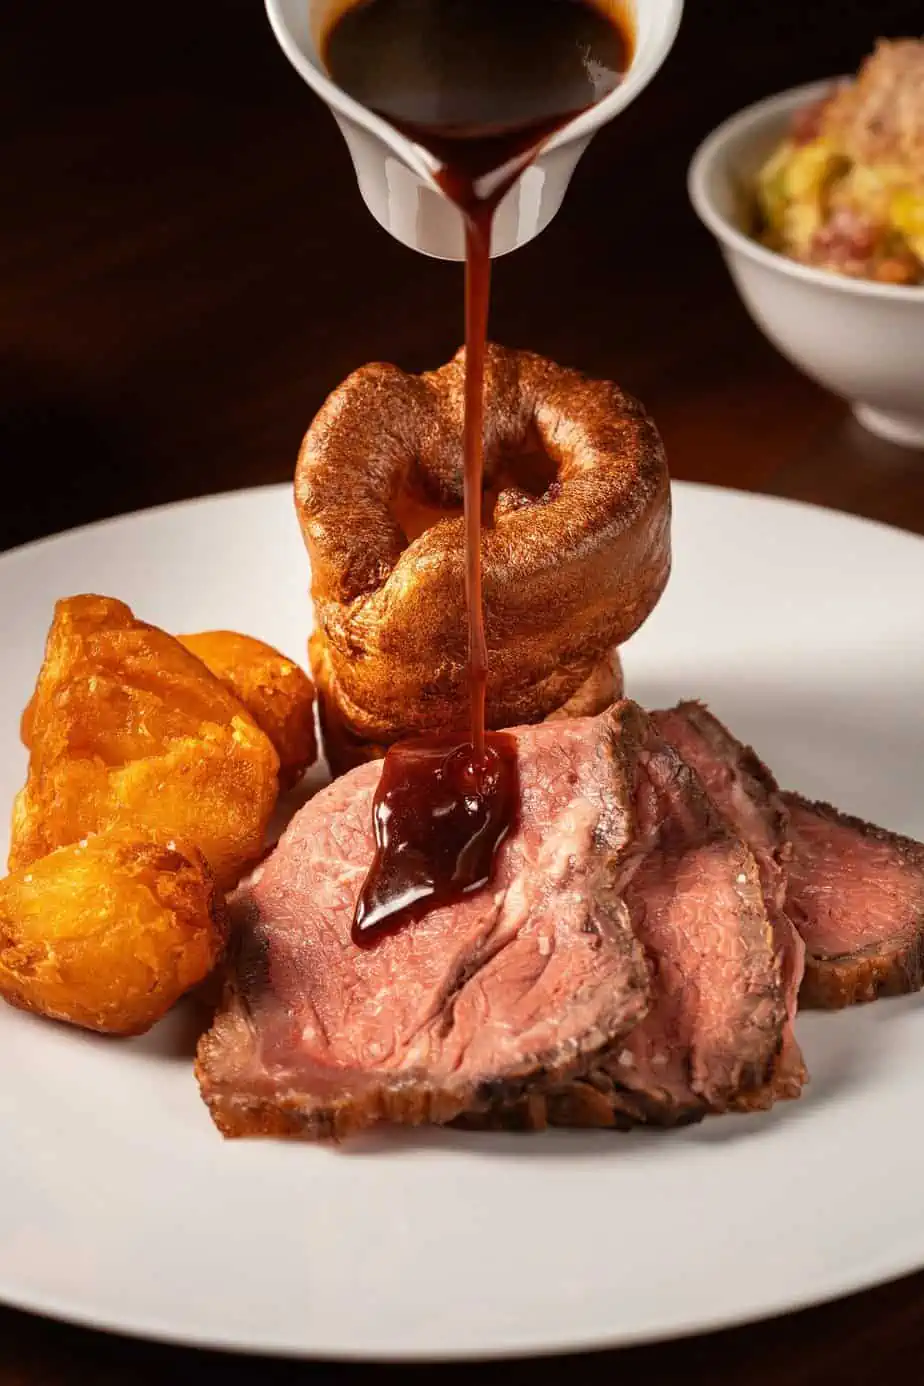 Dinner by Heston Blumenthal Dubai serves a Sunday Roast as a part of their new menu. This is the roast beef option.